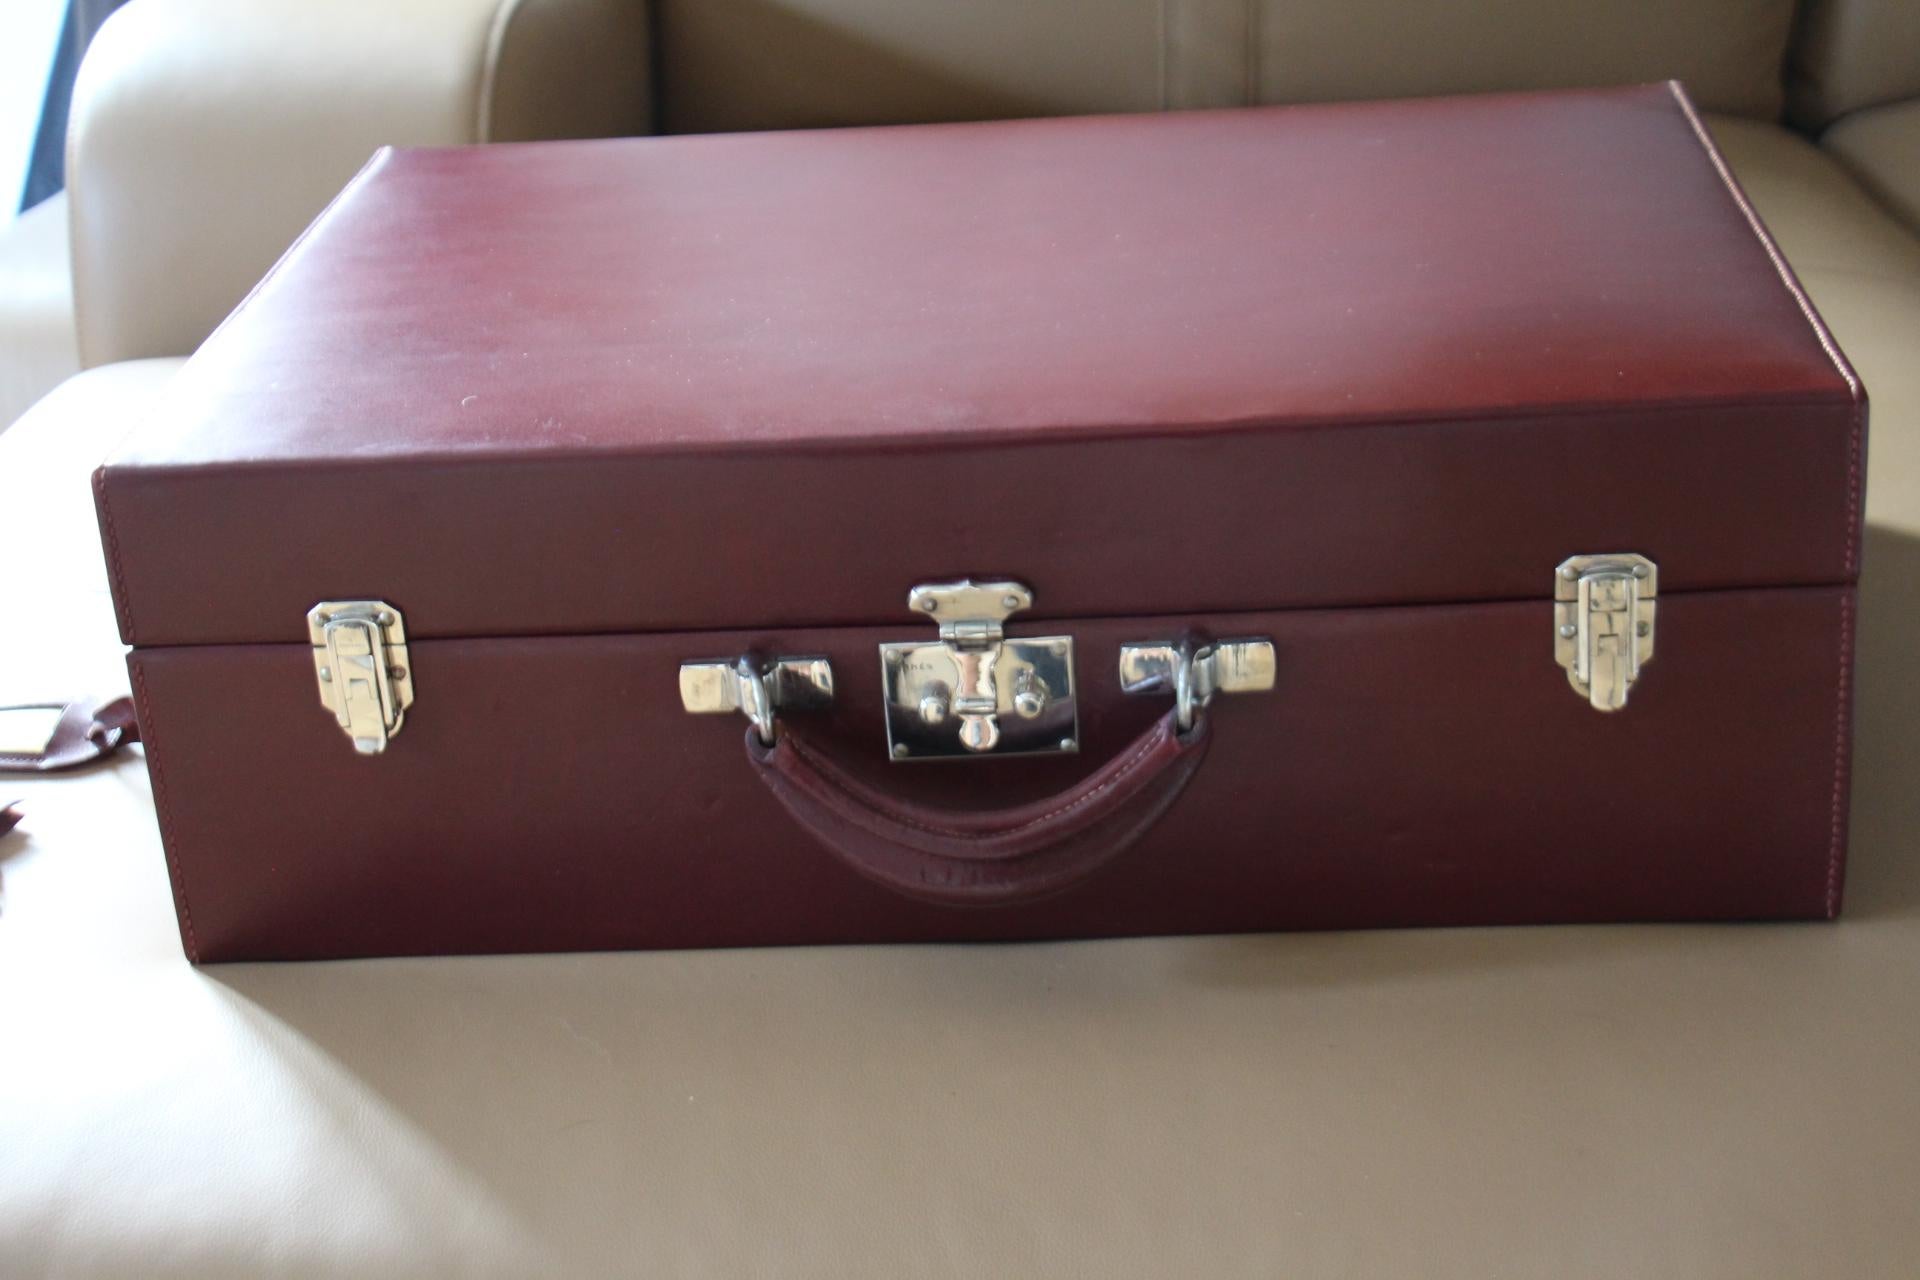 Spectacular calf box red leather suitcase. It features one leather top handle, nickel-plated brass hardware.Its two flip clasps as well as its one pinch lock closure are marked Hermes Paris .Very clean original red canvas interiors with alcantara